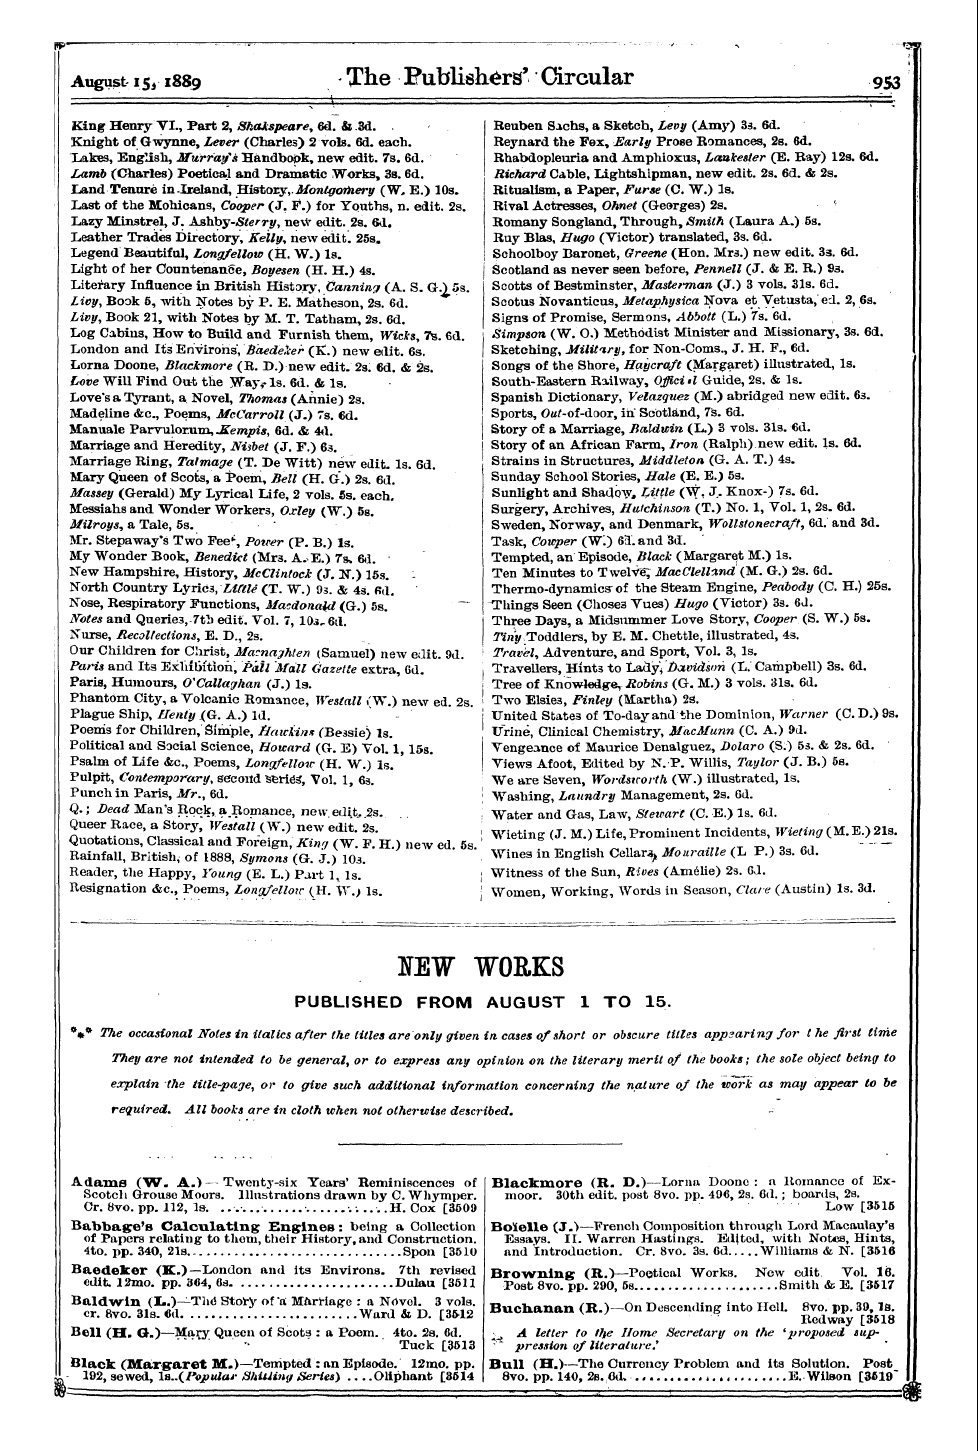 Publishers’ Circular (1880-1890): jS F Y, 1st edition - Eew Works Published From August 1 To 15.